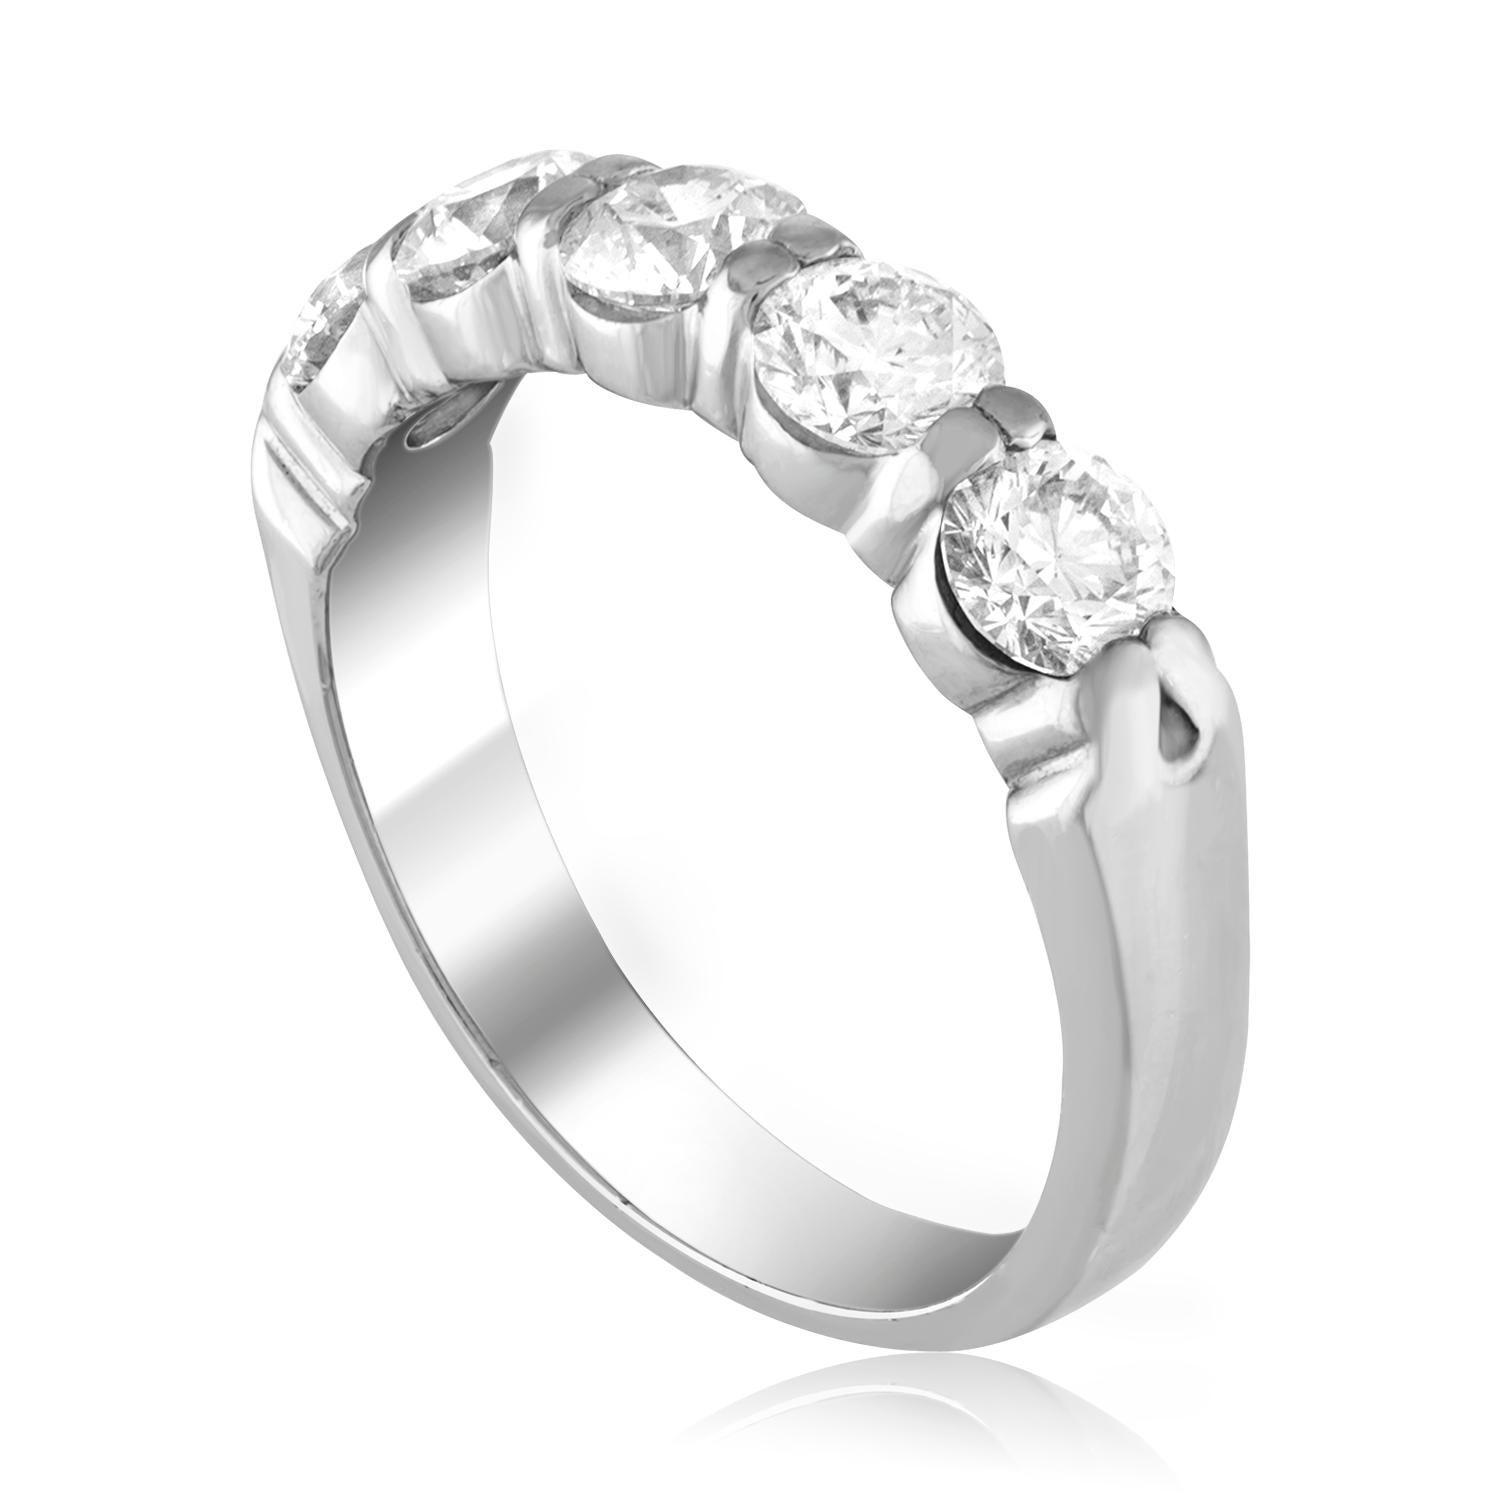 Very Beautiful Half Diamond Band Ring
The ring is Platinum
There are 5 Round Cut Diamonds prong set
There are 1.38 Carats In Diamonds F VS
The ring is a size 6, sizable. 
The band is 4.25 mm wide and tapers down to 3.34 mm.
The ring weighs 6.4 grams.